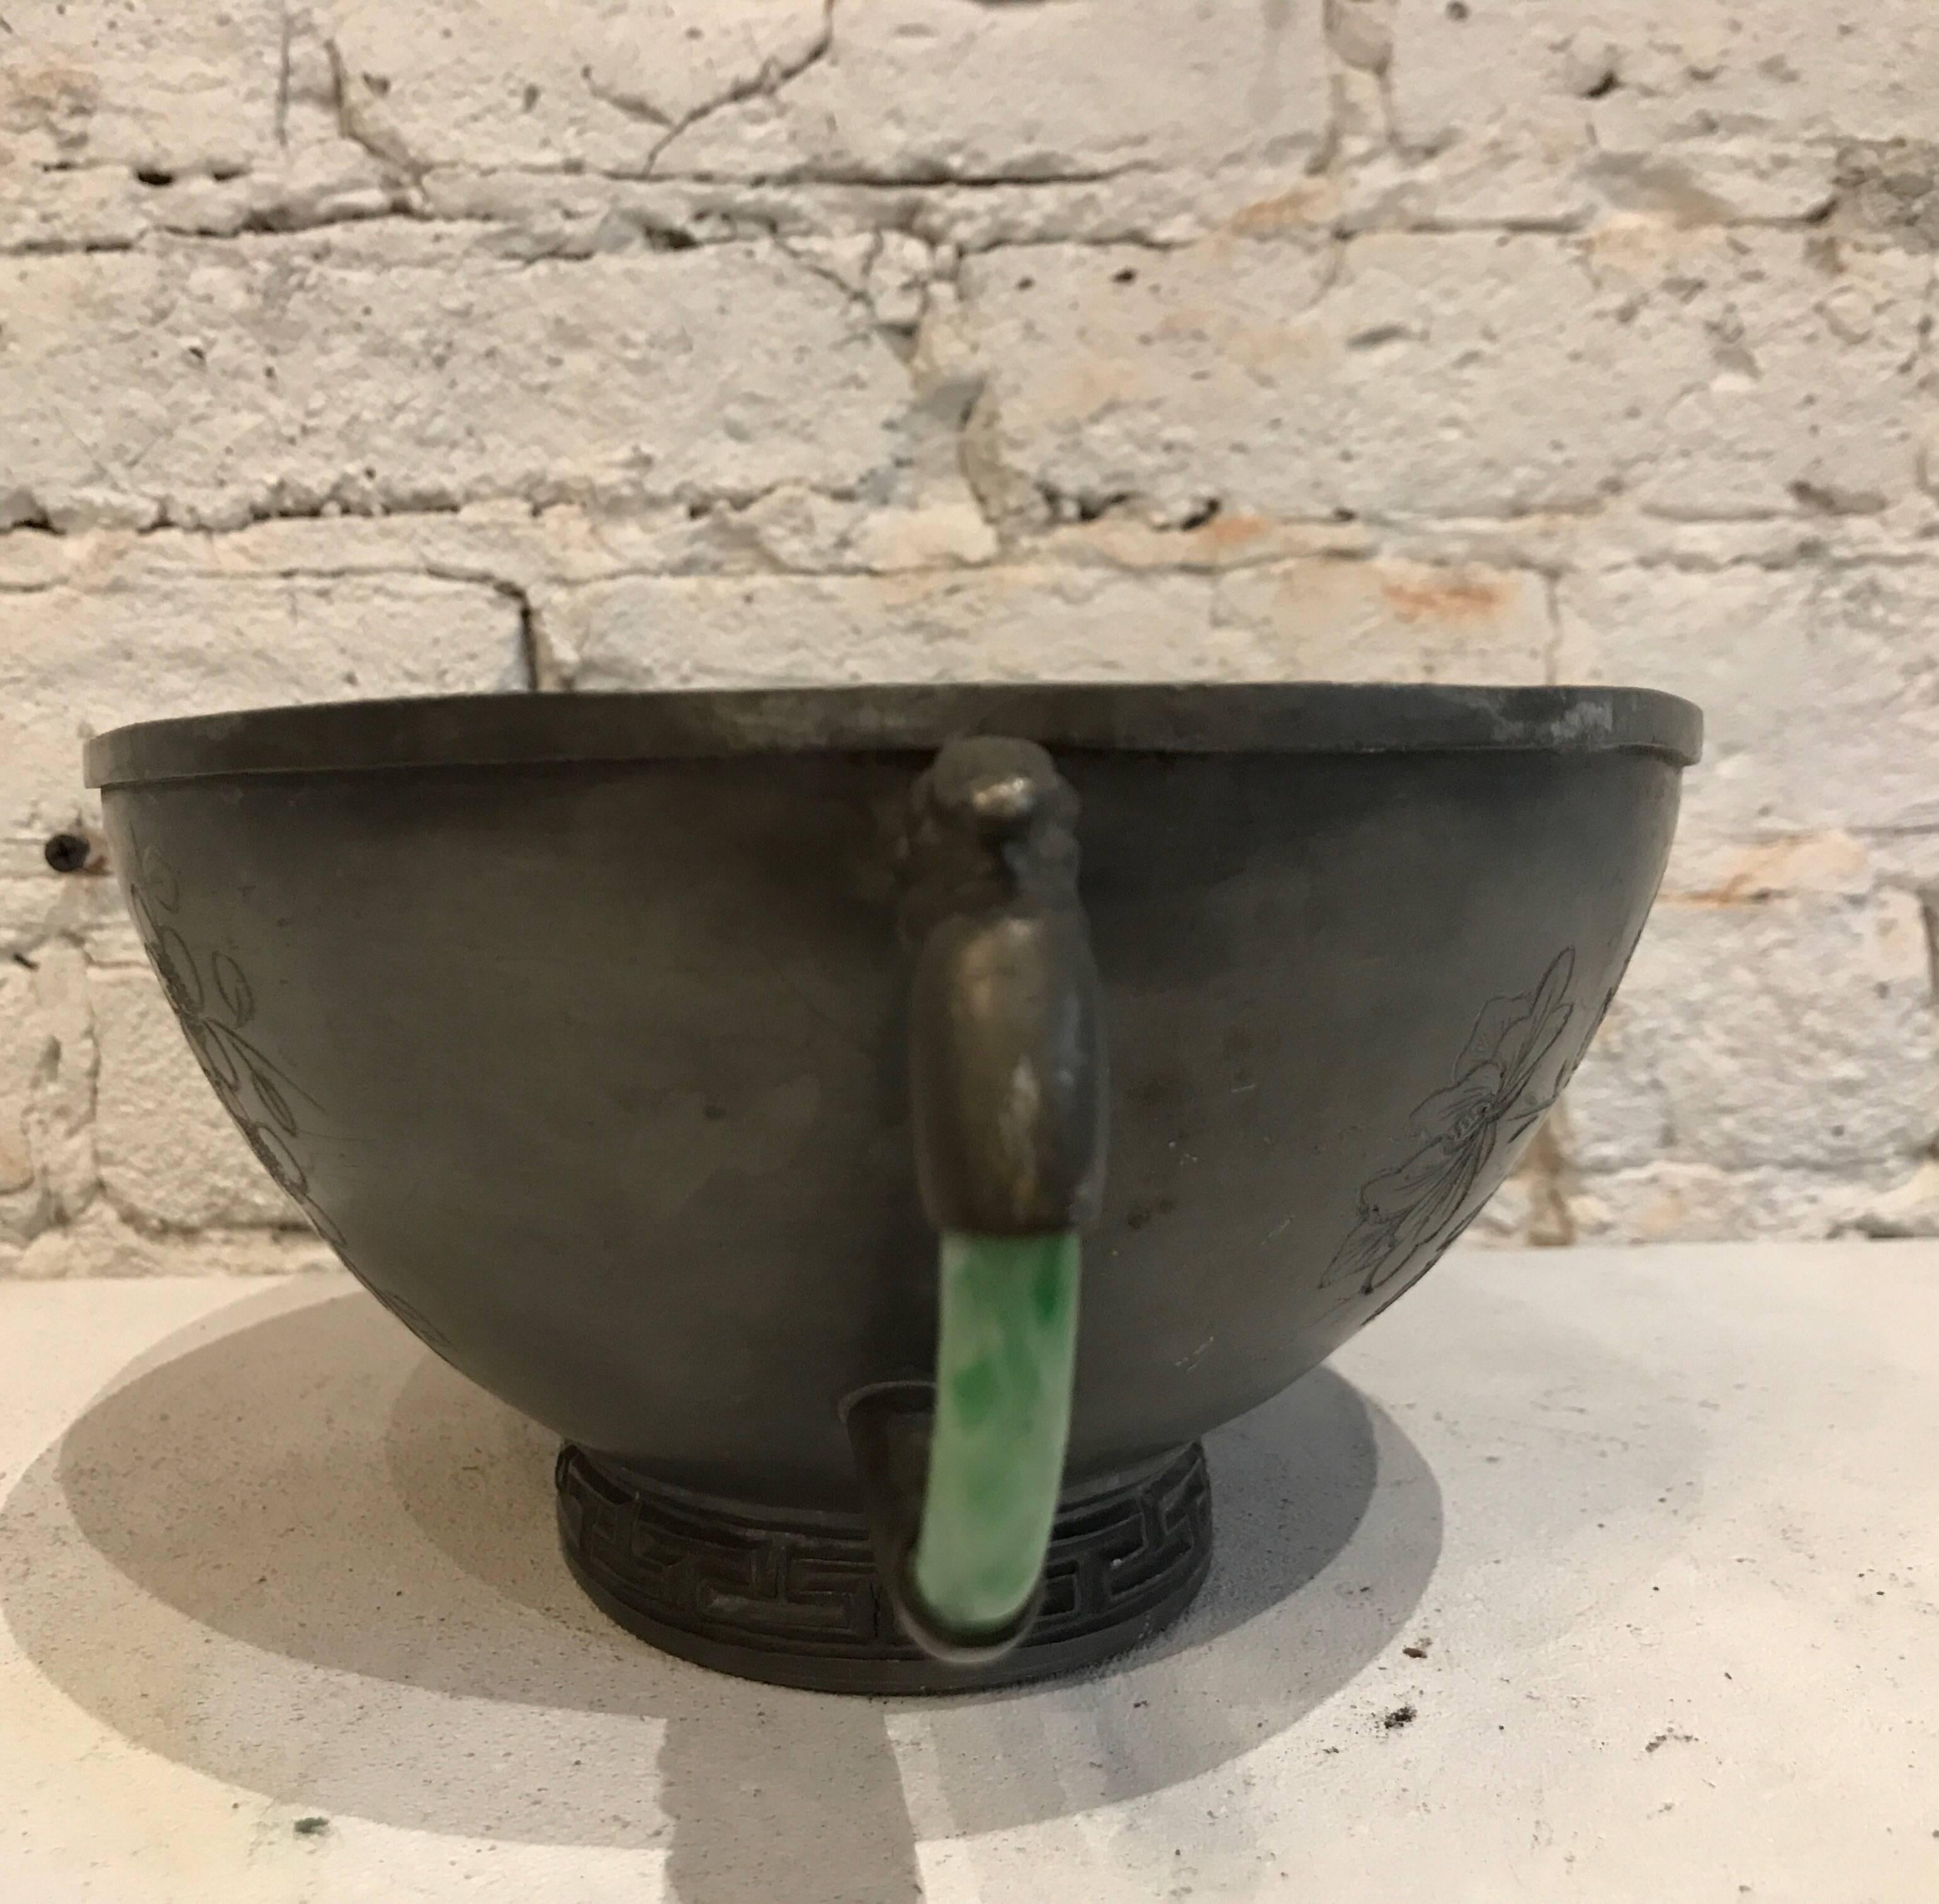 Early 20th century pewter/jade handled Chinese cachepot 
This lovely piece has classic engravings and jade handles



Measures: 10.5 inch W (including handles) x 7.25 inch D x 4 inch H
Actual Pot: 8.5 inch W x 7.25 inch D
Bottom of pot: 4.25